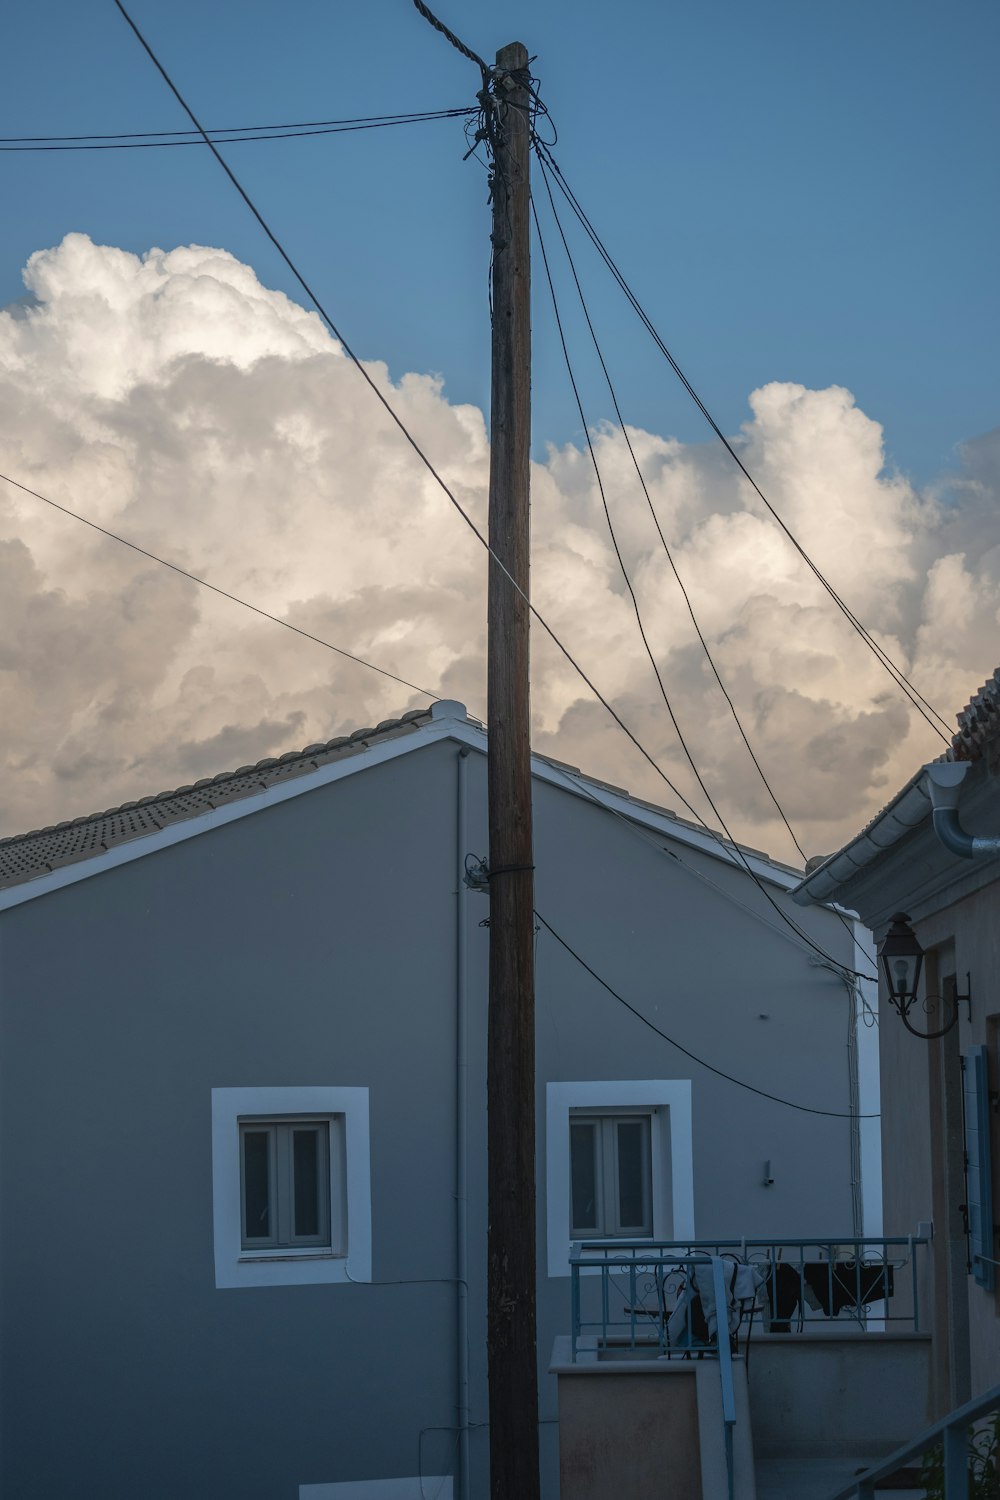 a telephone pole in front of a house with a cloudy sky in the background